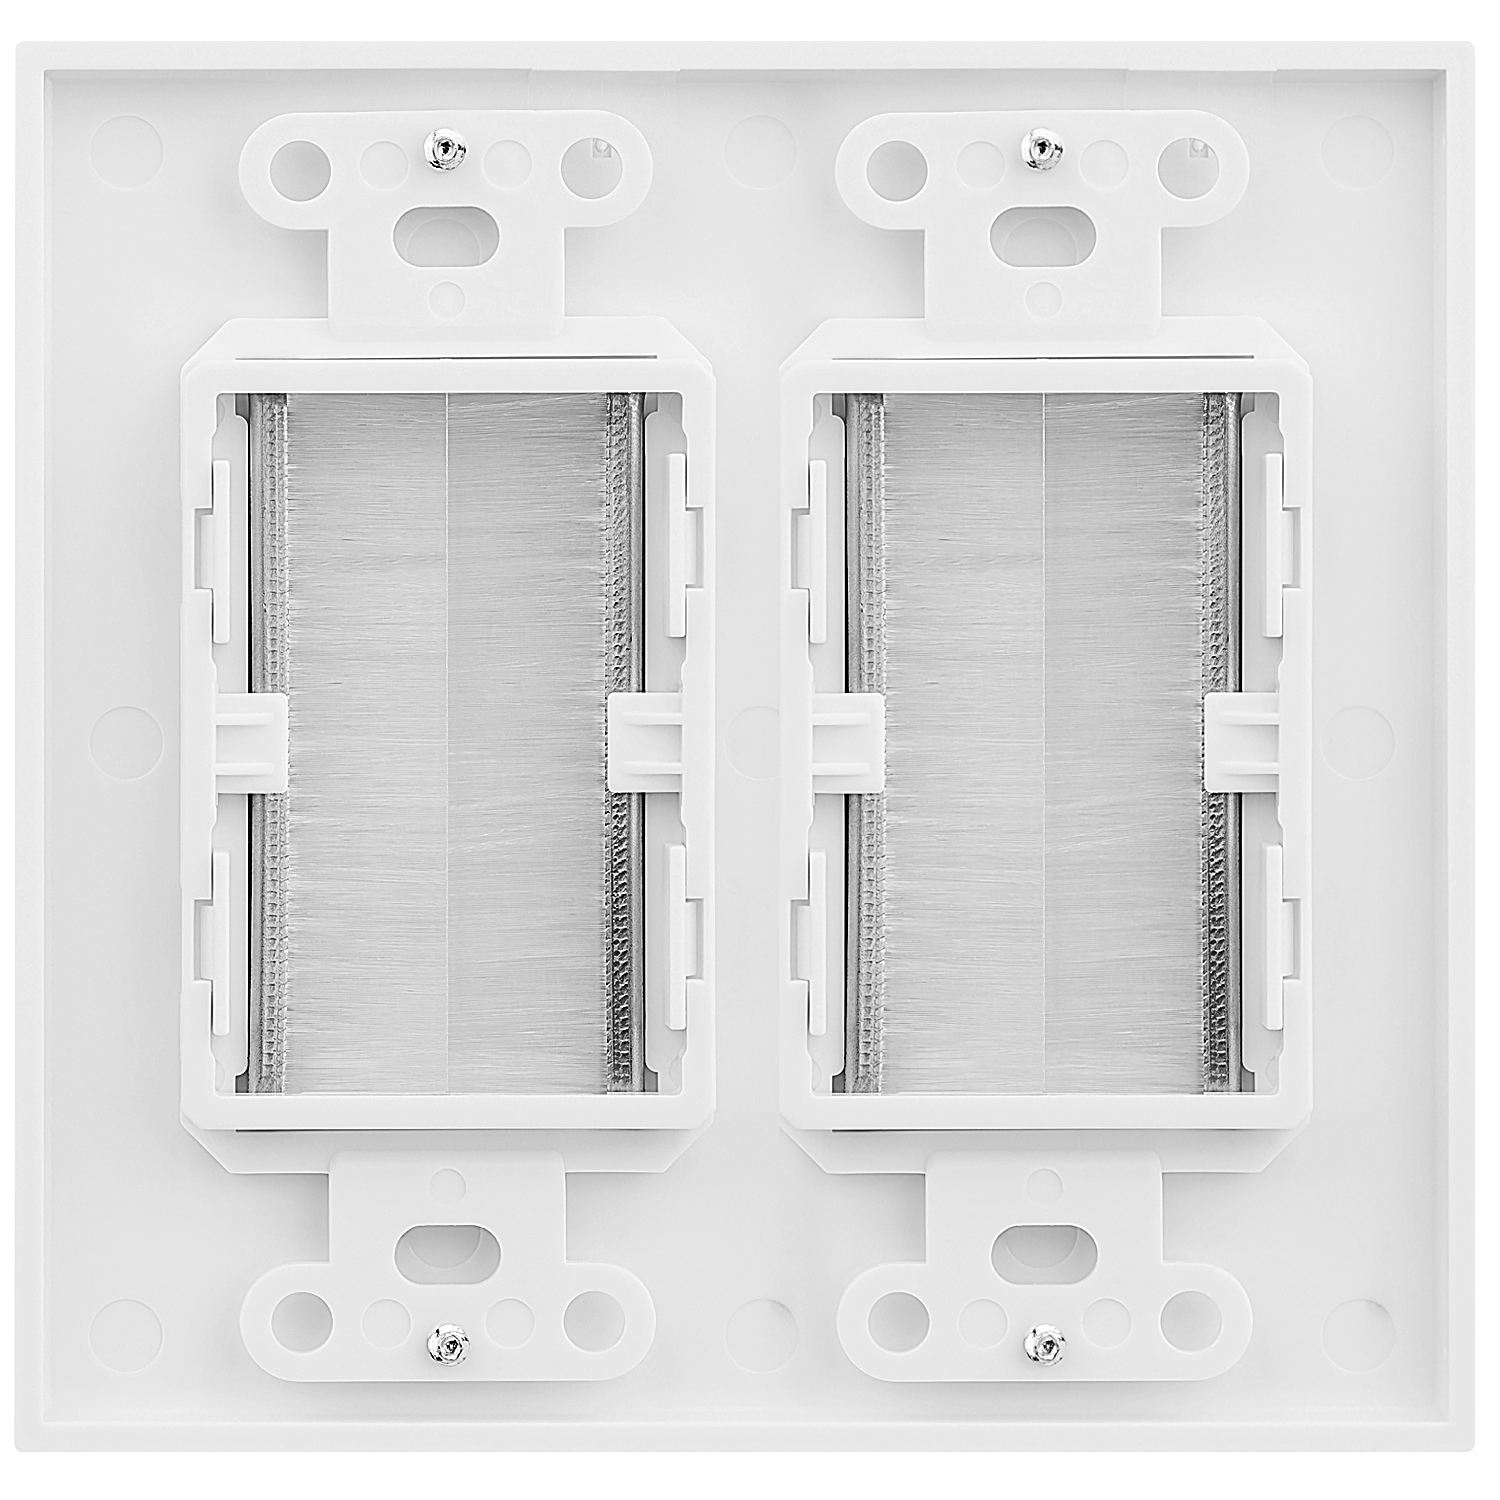 Fosmon 2-Gang Wall Plate, Brush Style Opening Passthrough Low Voltage Cable Plate in-Wall Installation for Speaker Wires, Coaxial Cables, HDMI Cables, or Network/Phone Cables - image 3 of 8